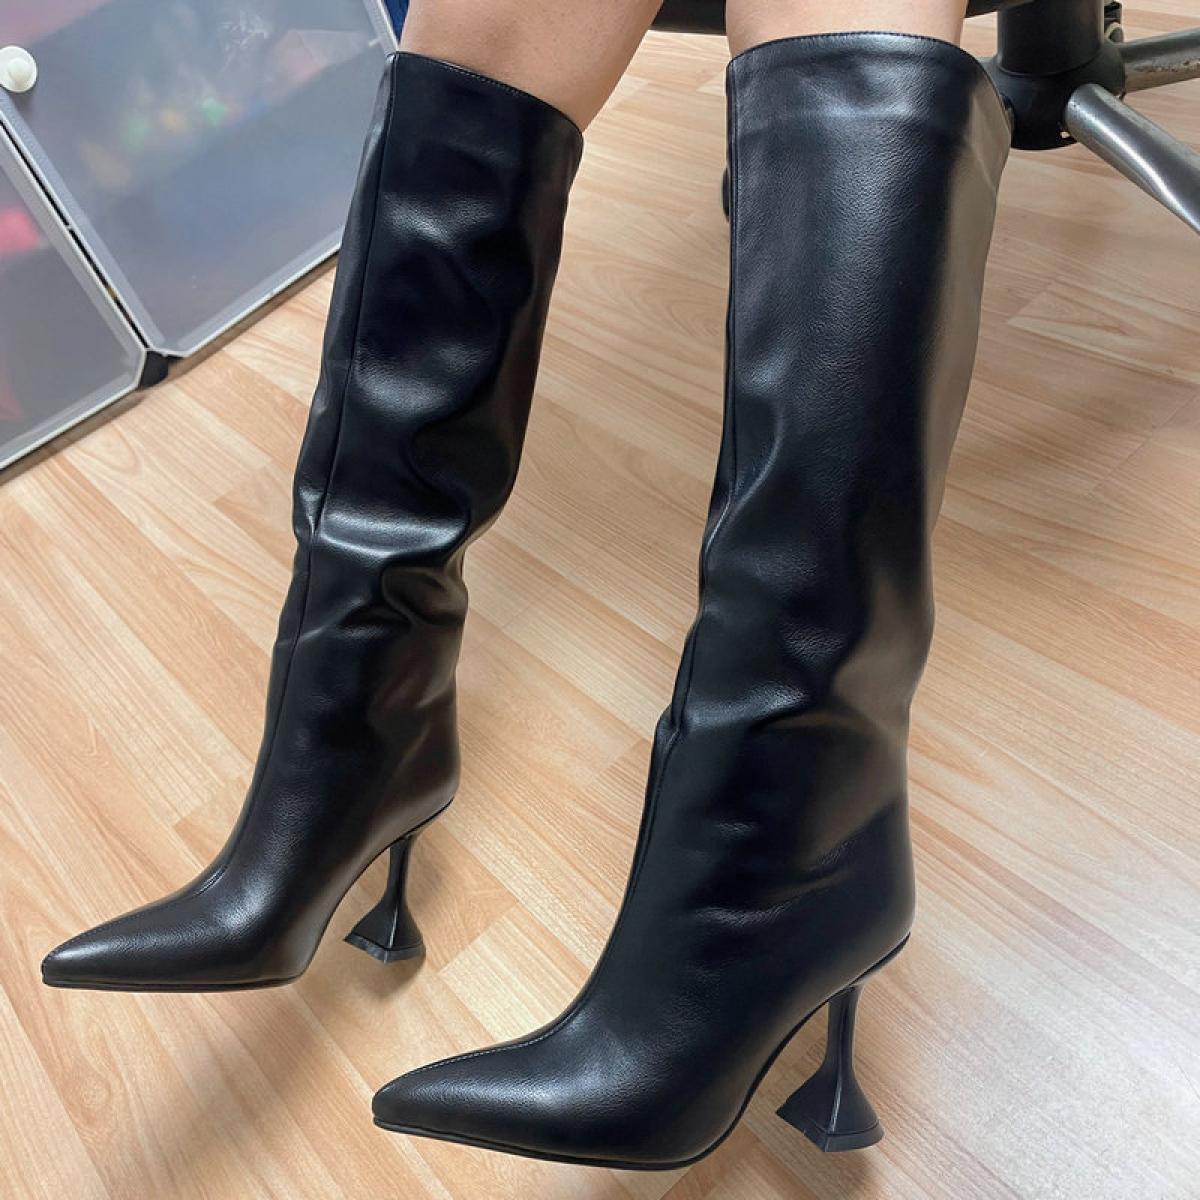 Thigh High Boots Poined Toe Women Knee High Boots Strange High Heels Ladies Runway Party Wedding Shoes Size 3443  Women'